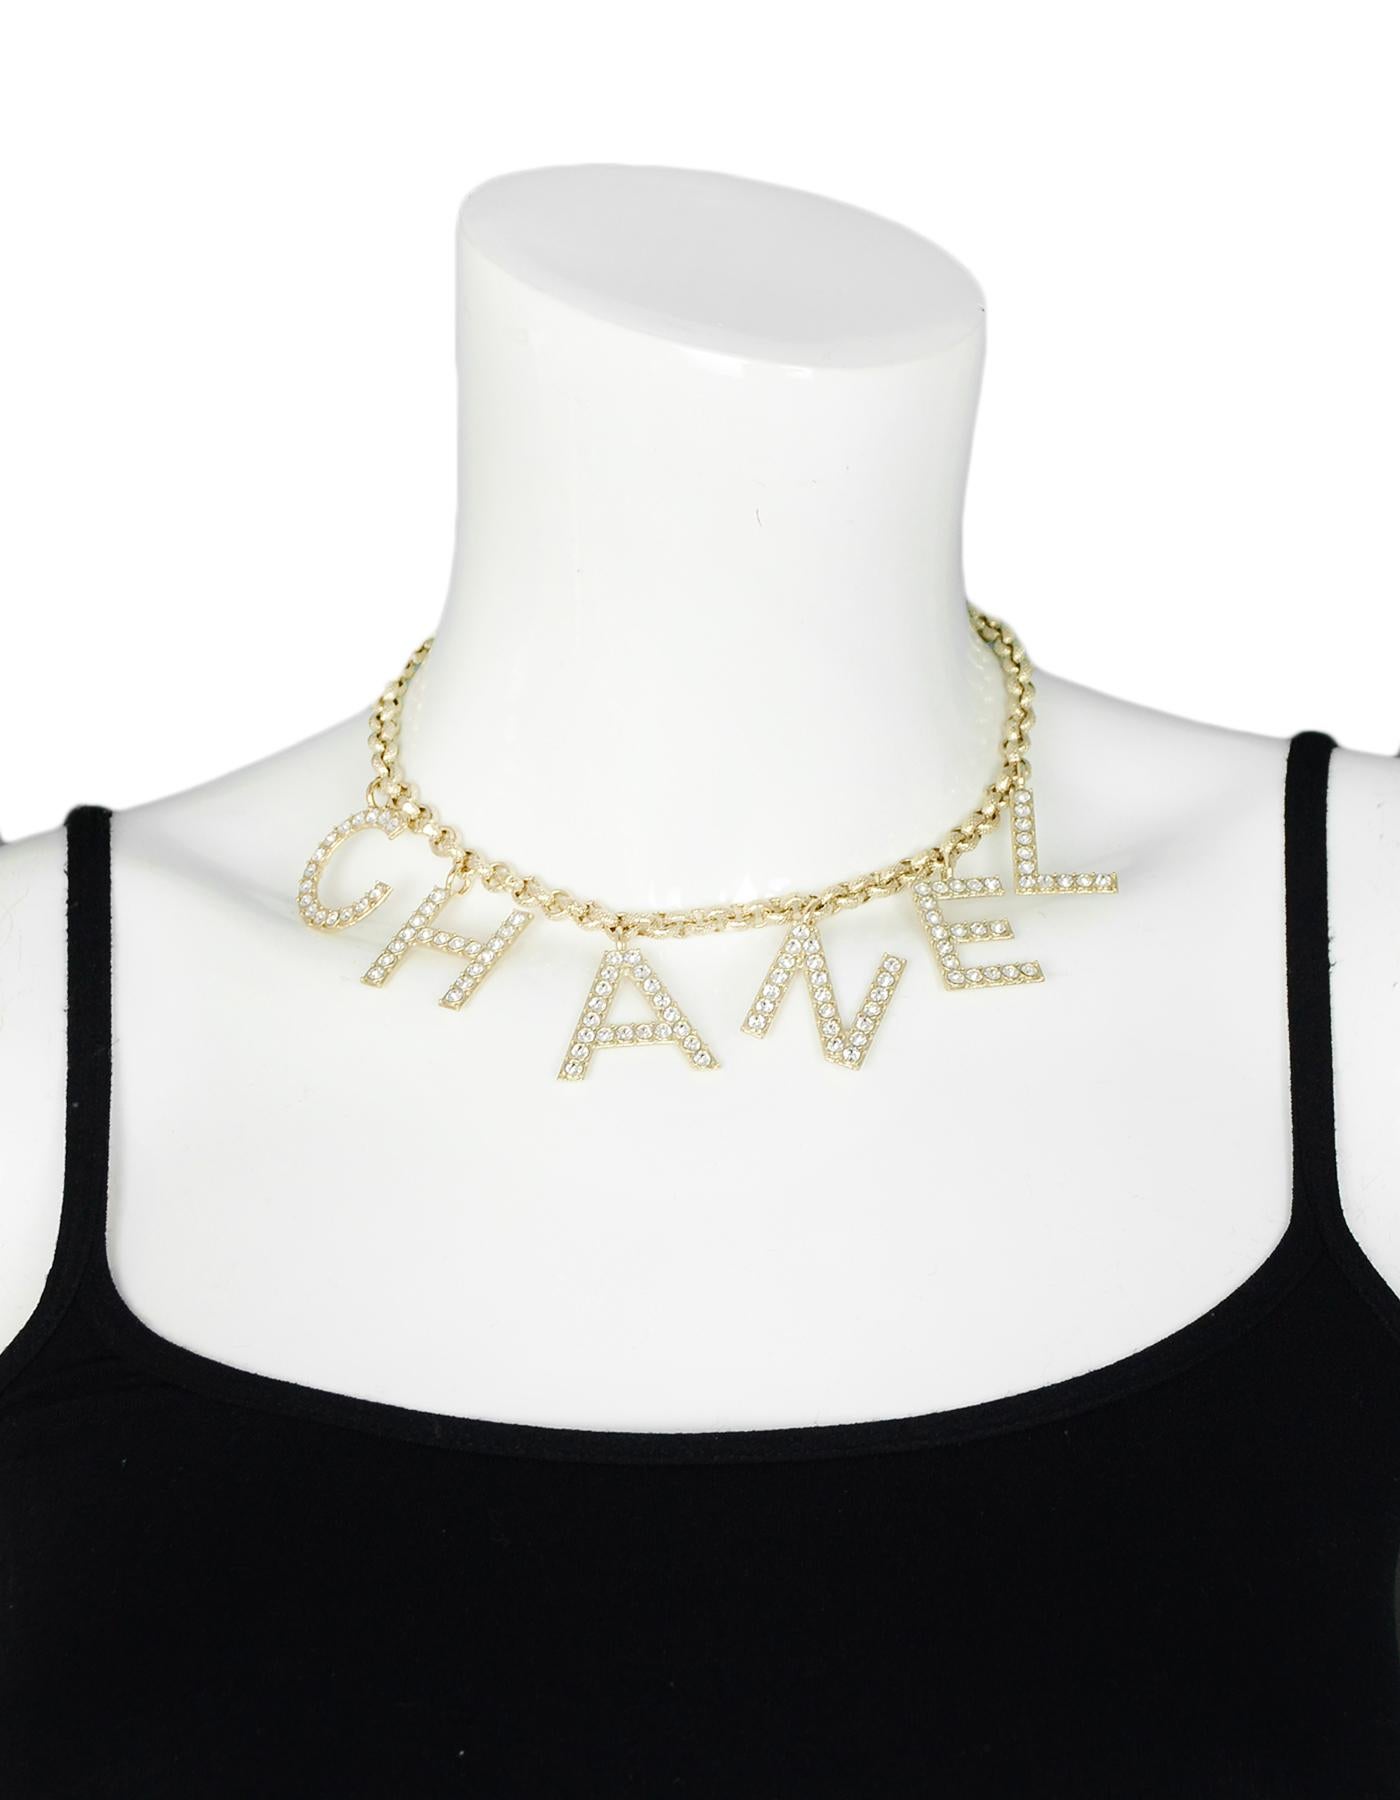 Chanel 2019 Sold Out By The Sea Collection Crystal Name Necklace 
Made In: Italy
Year of Production: 2019
Color: Goldtone
Materials: Metal, crystals
Hallmarks: Chanel B19 CC S Made in Italy
Closure/Opening: Lobster clasp
Overall Condition: Excellent